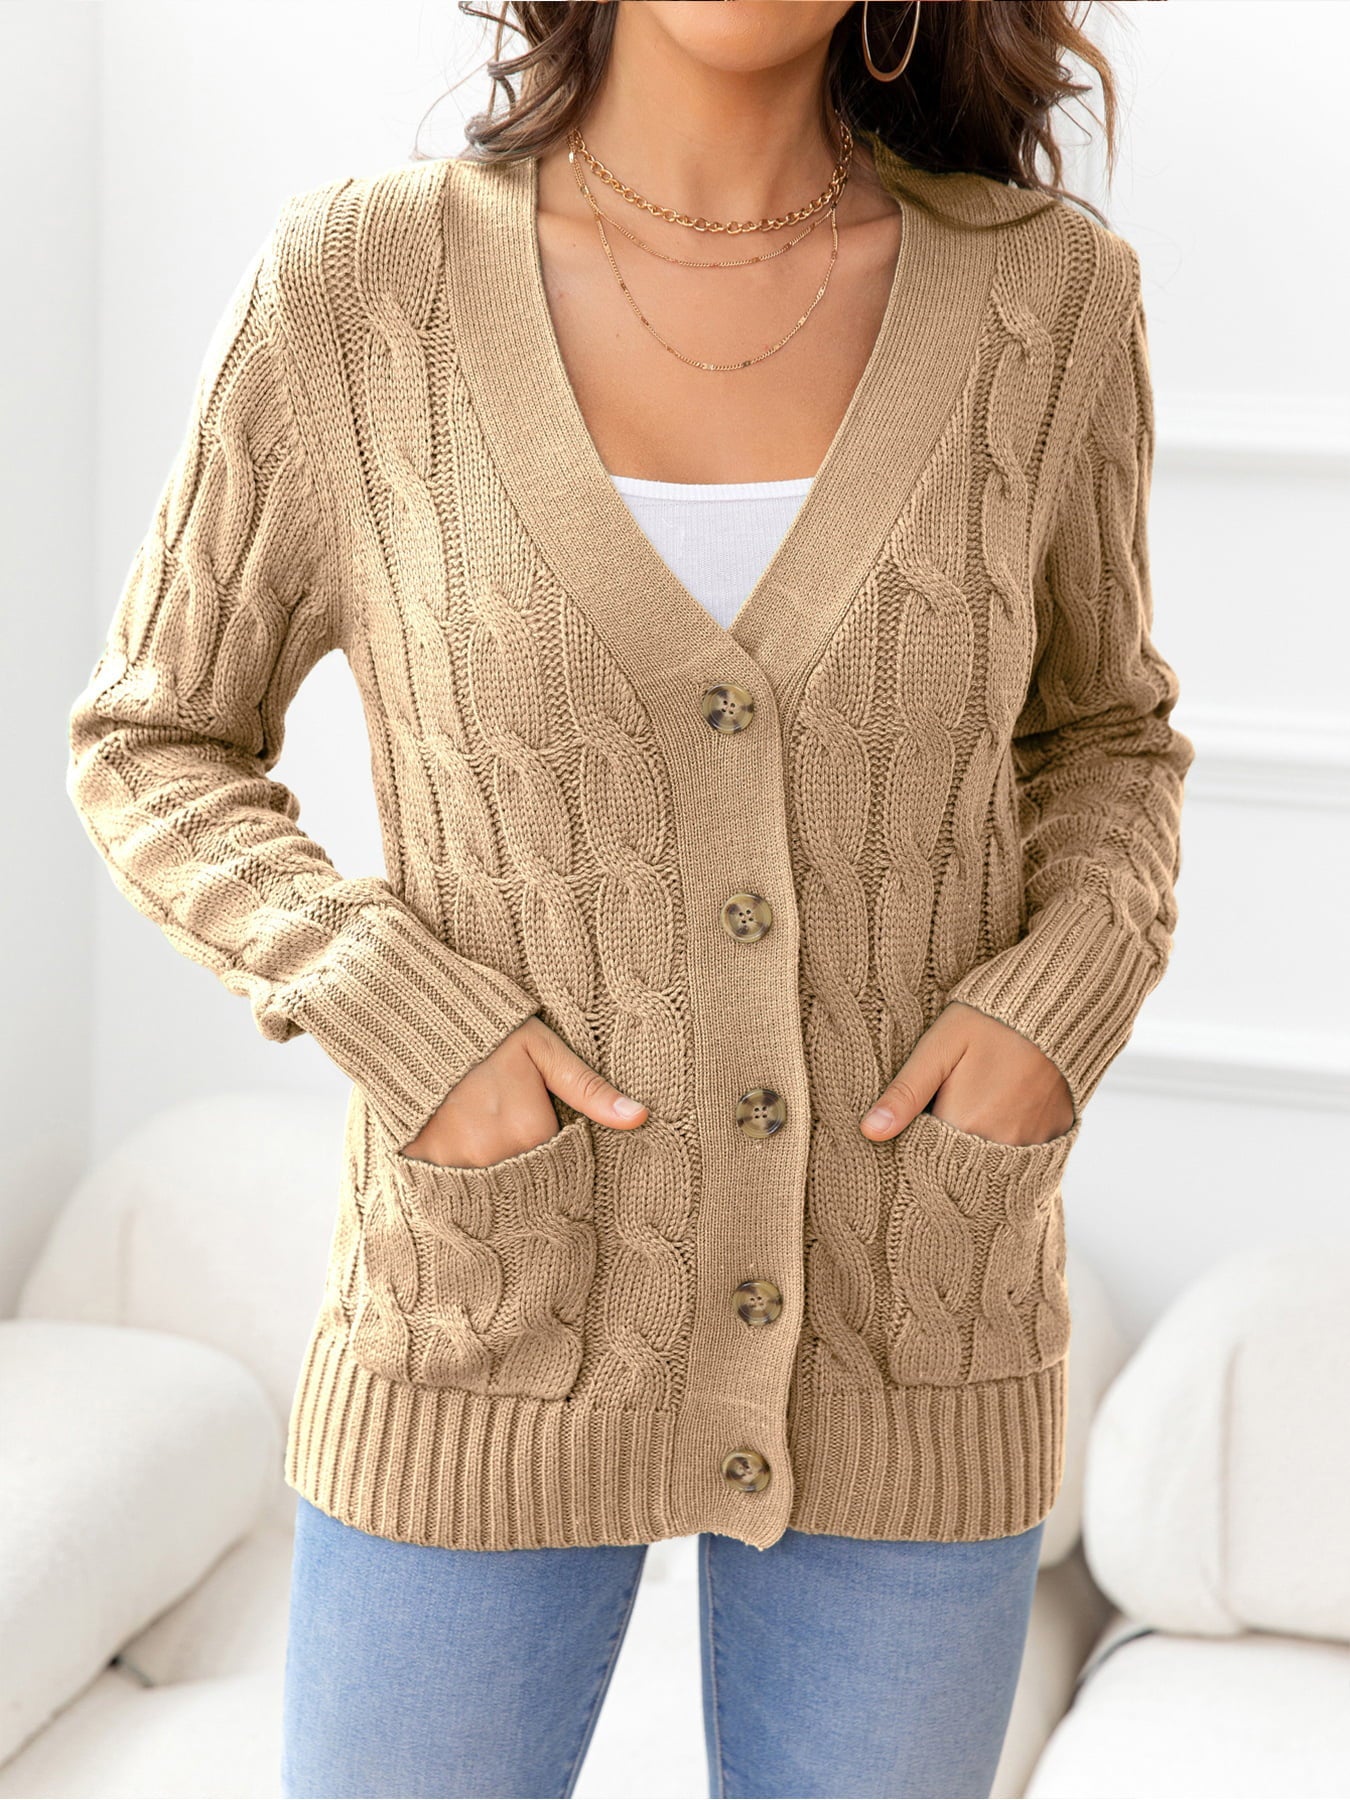 Button Down Cable-Knit Cardigan - Khaki / S - Women’s Clothing & Accessories - Shirts & Tops - 41 - 2024